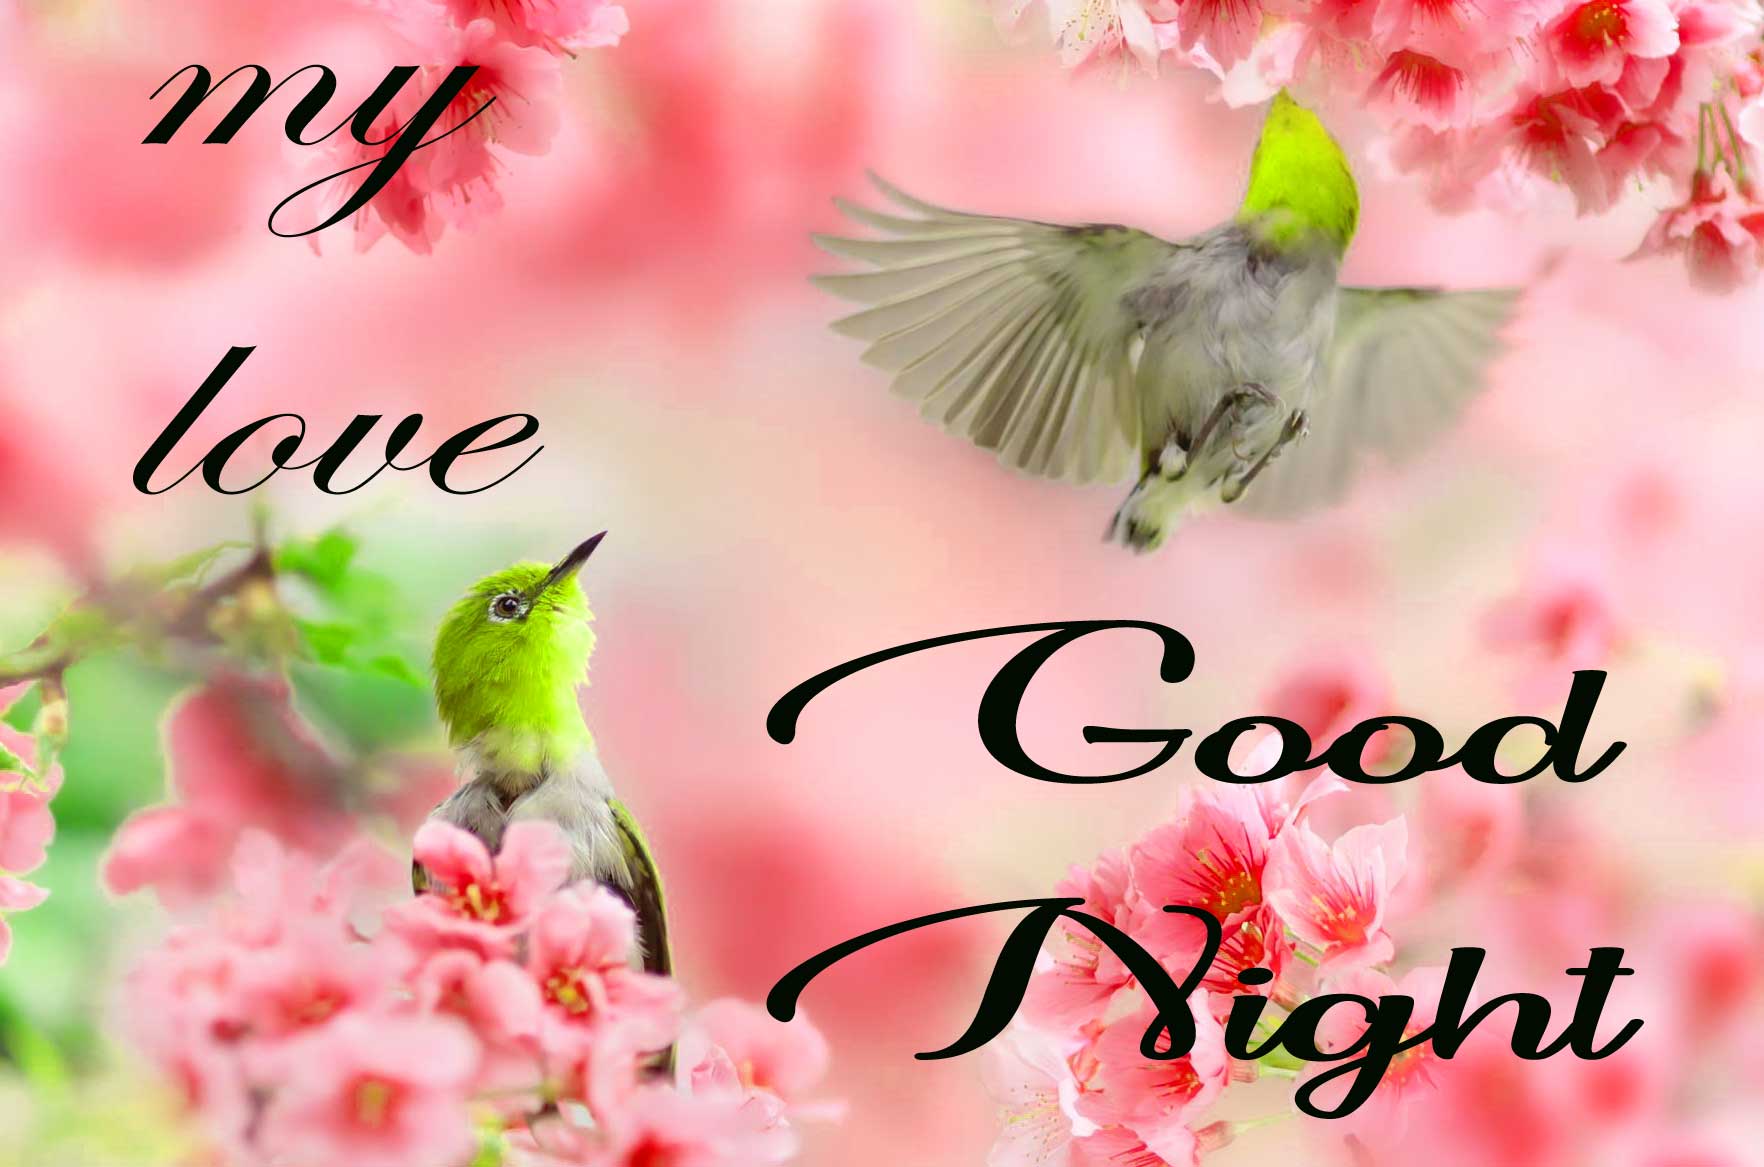 New Free good night images Photo Download 